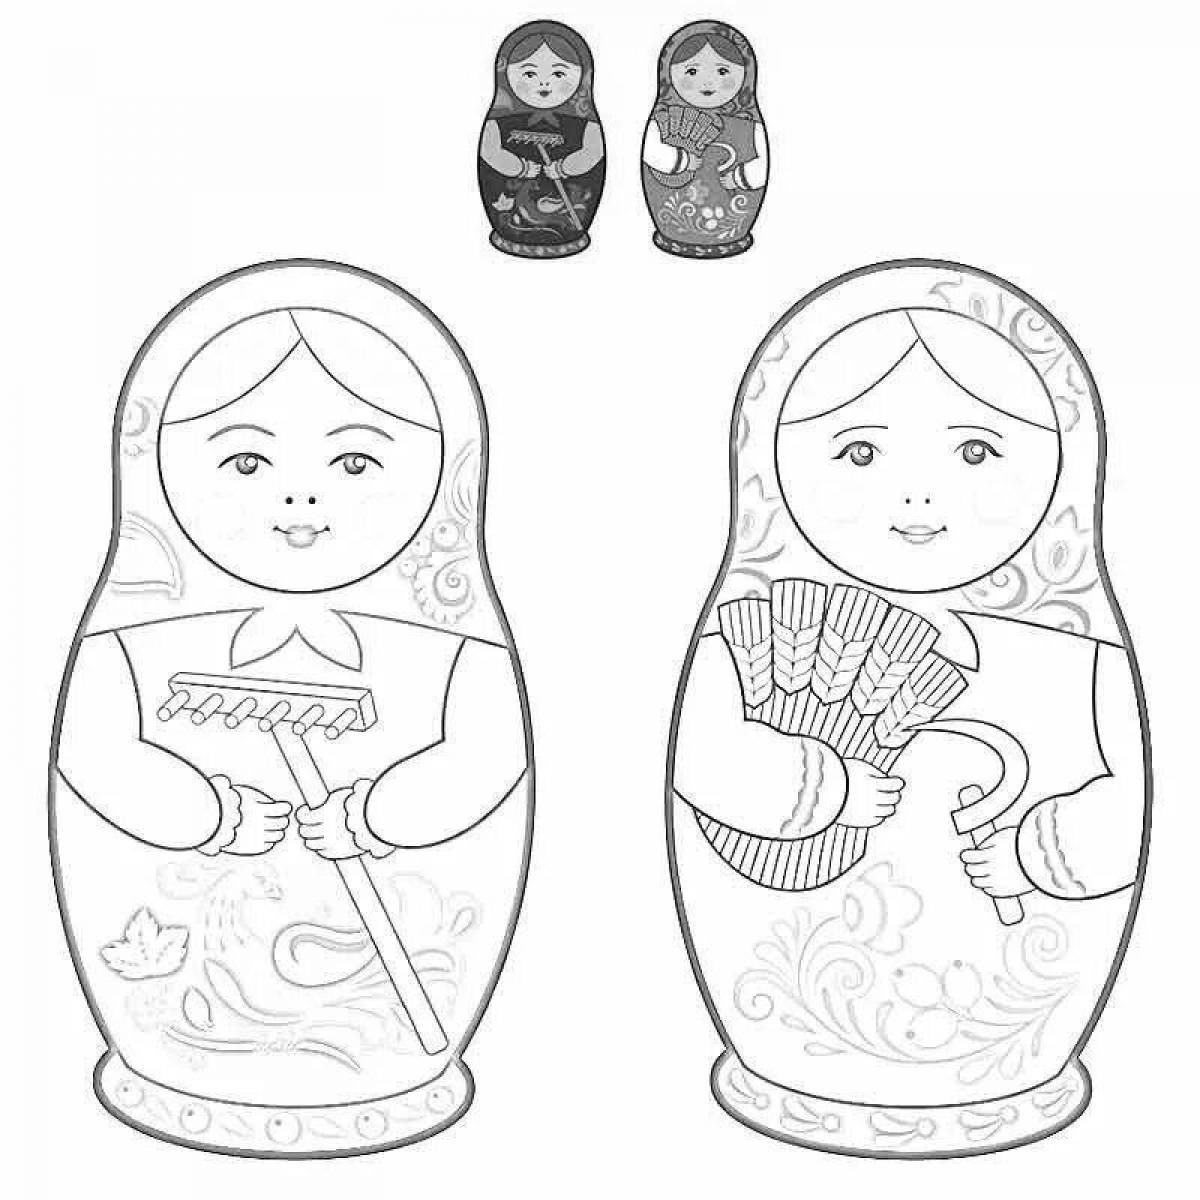 Playful pictures with nesting dolls